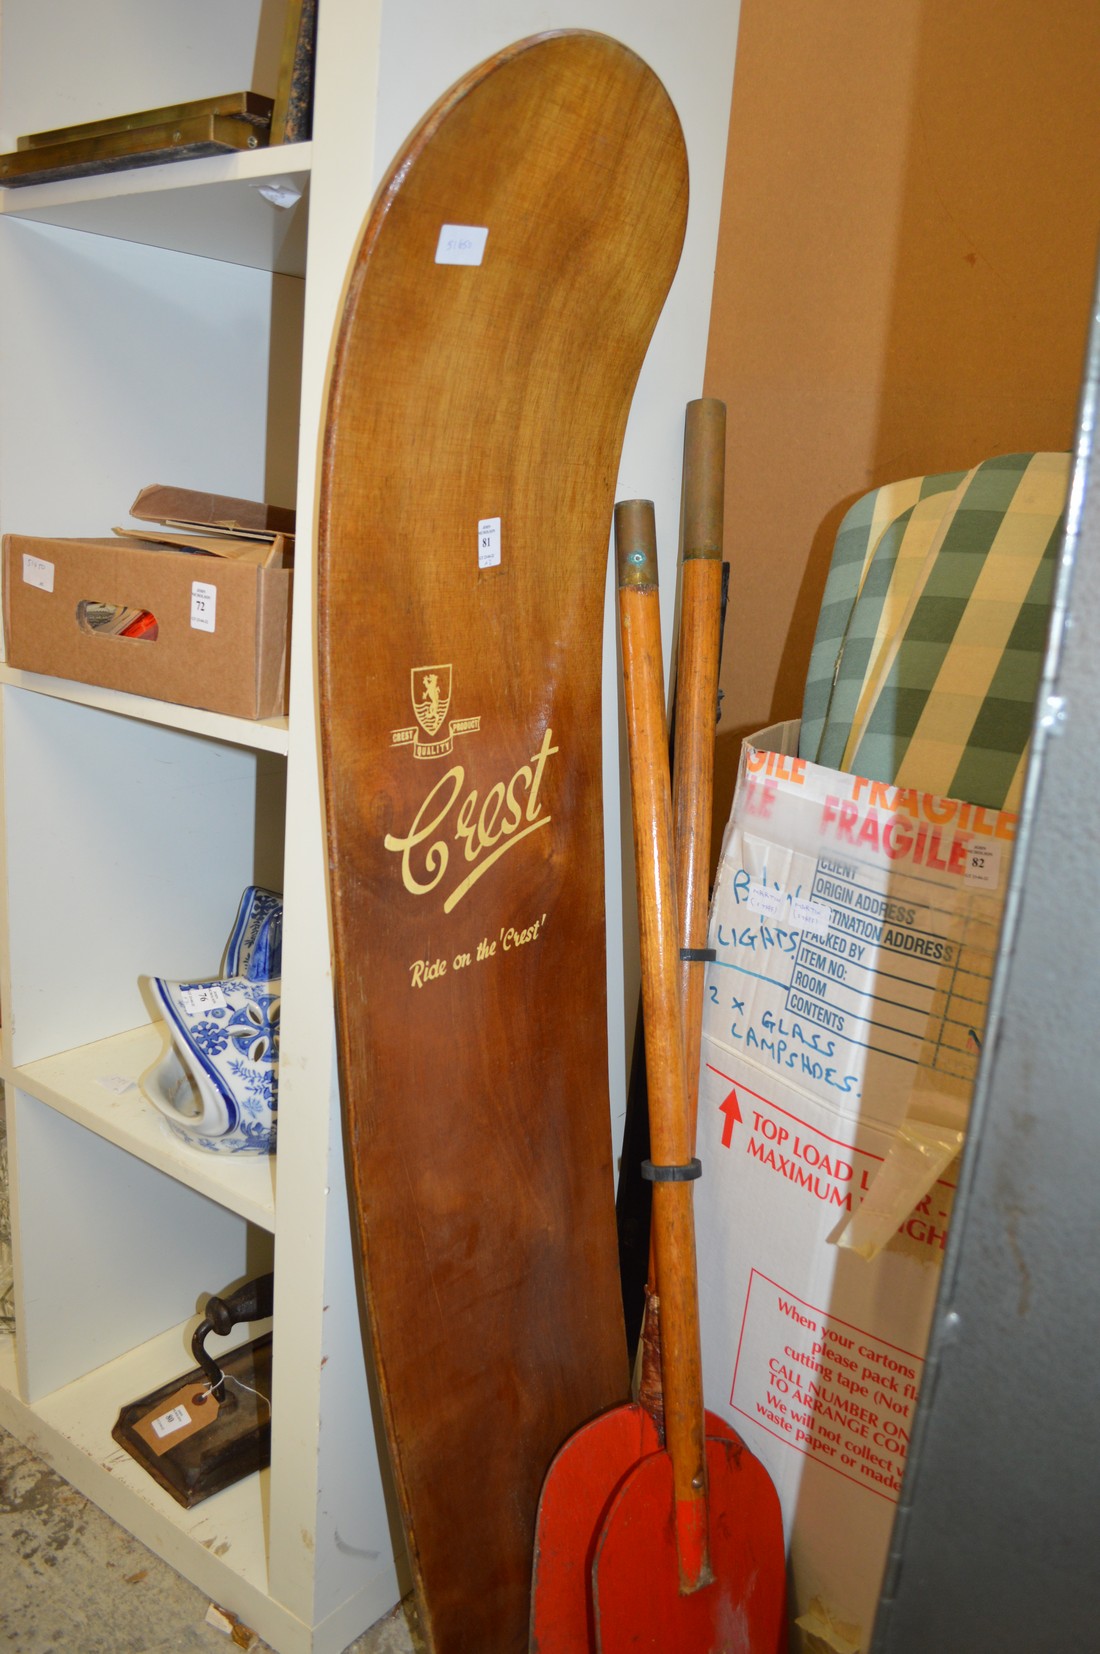 A Crest early bodyboard with a pair of paddles.